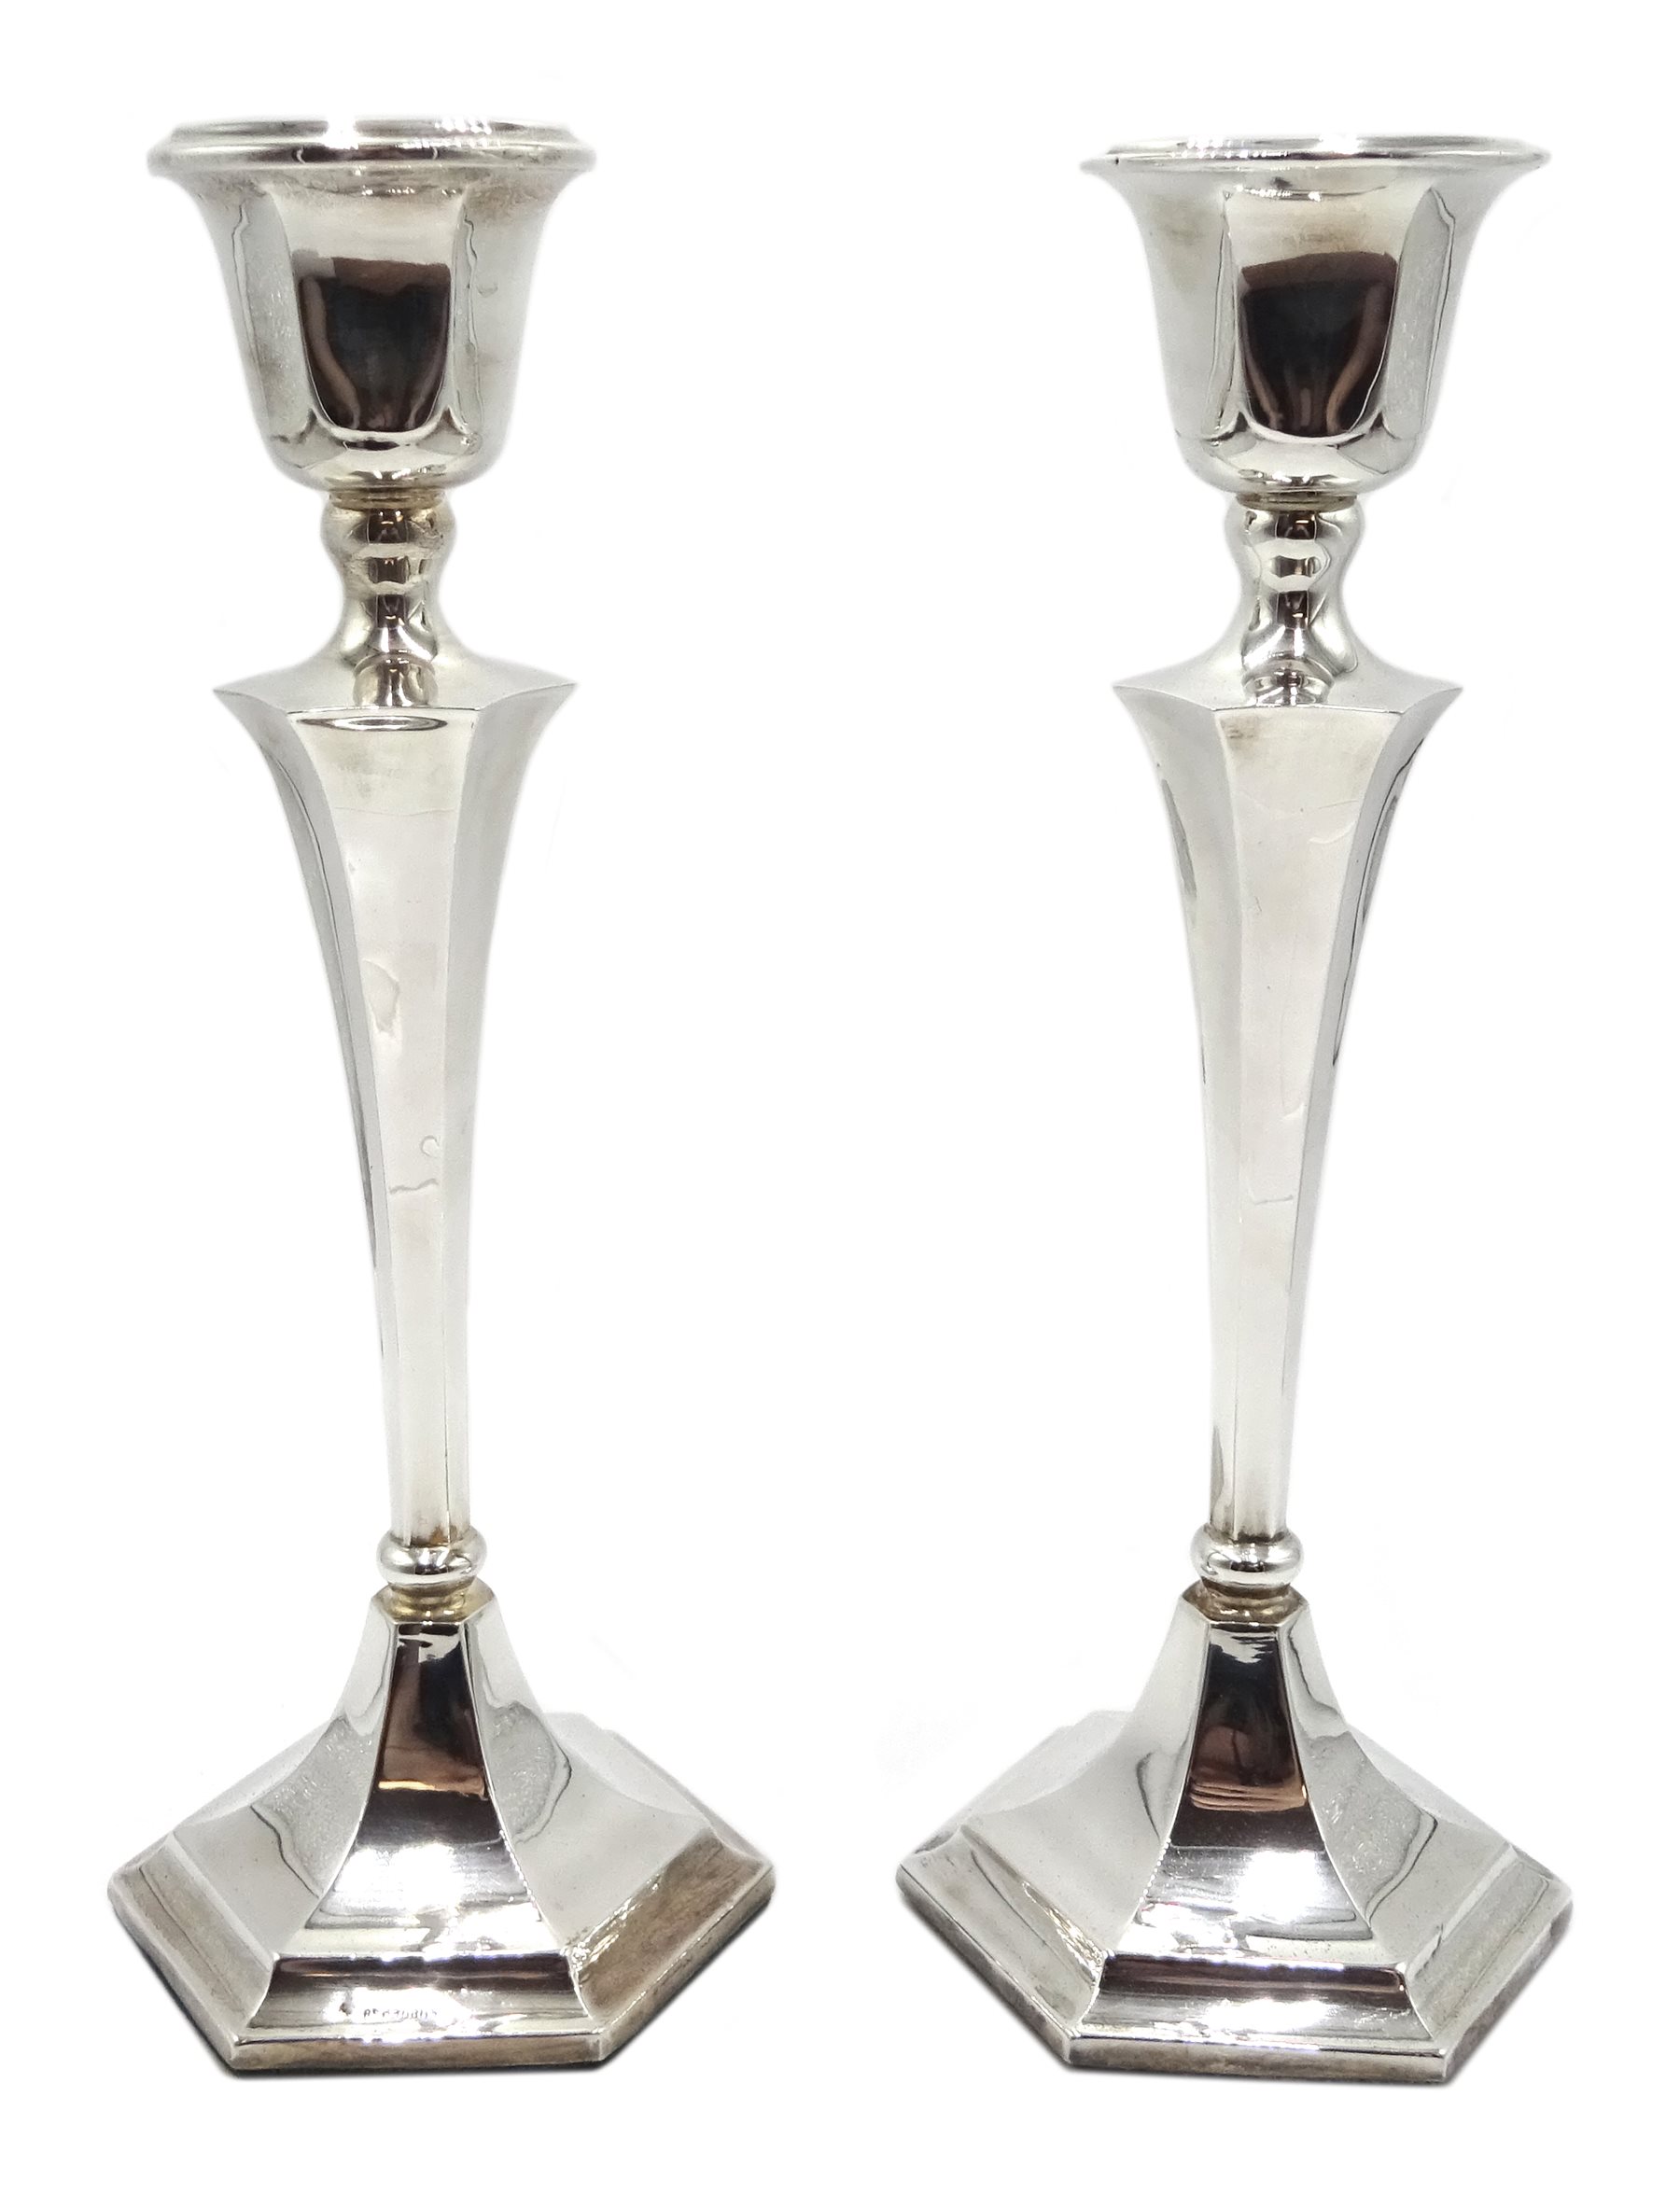 Matched pair of candlesticks one by James Deakin & Sons, Chester 1928 , the other makers mark S & Co